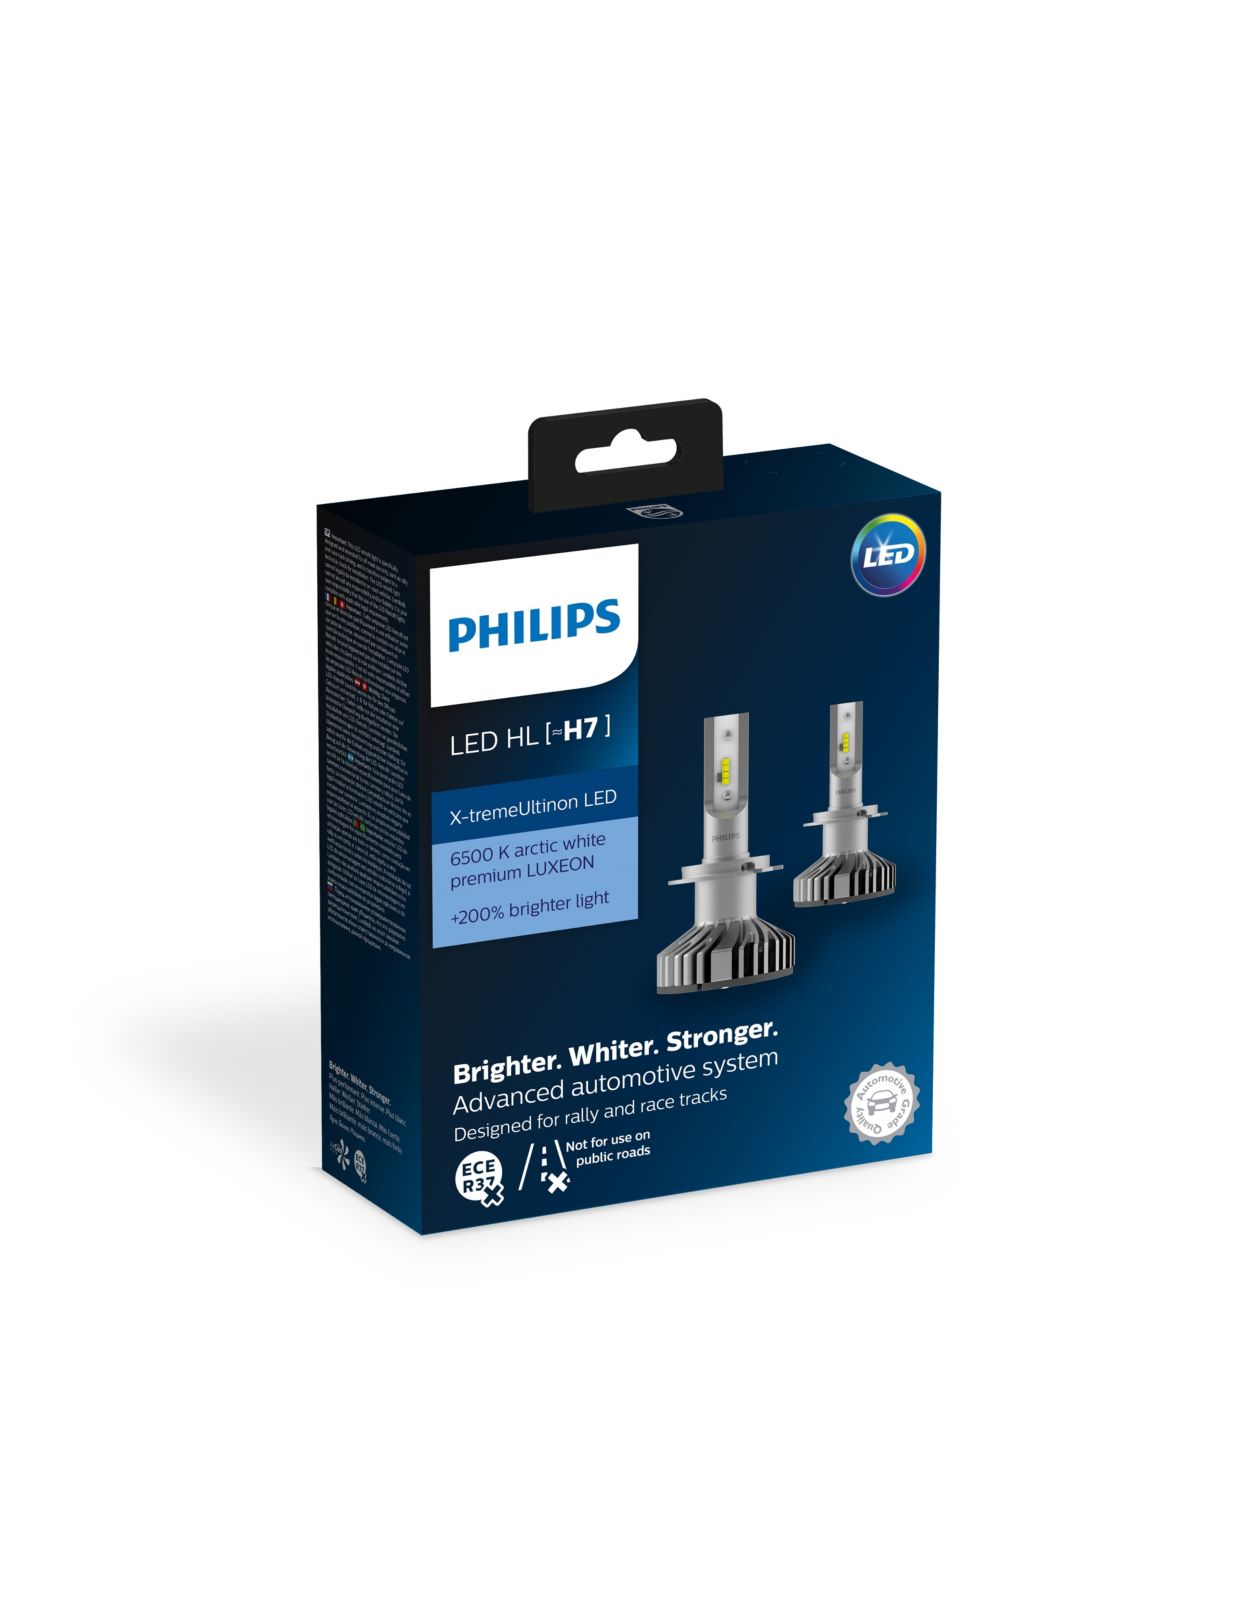 https://images.philips.com/is/image/philipsconsumer/80c8942666394d53a0cfafab00cfb687?$jpglarge$&wid=1250